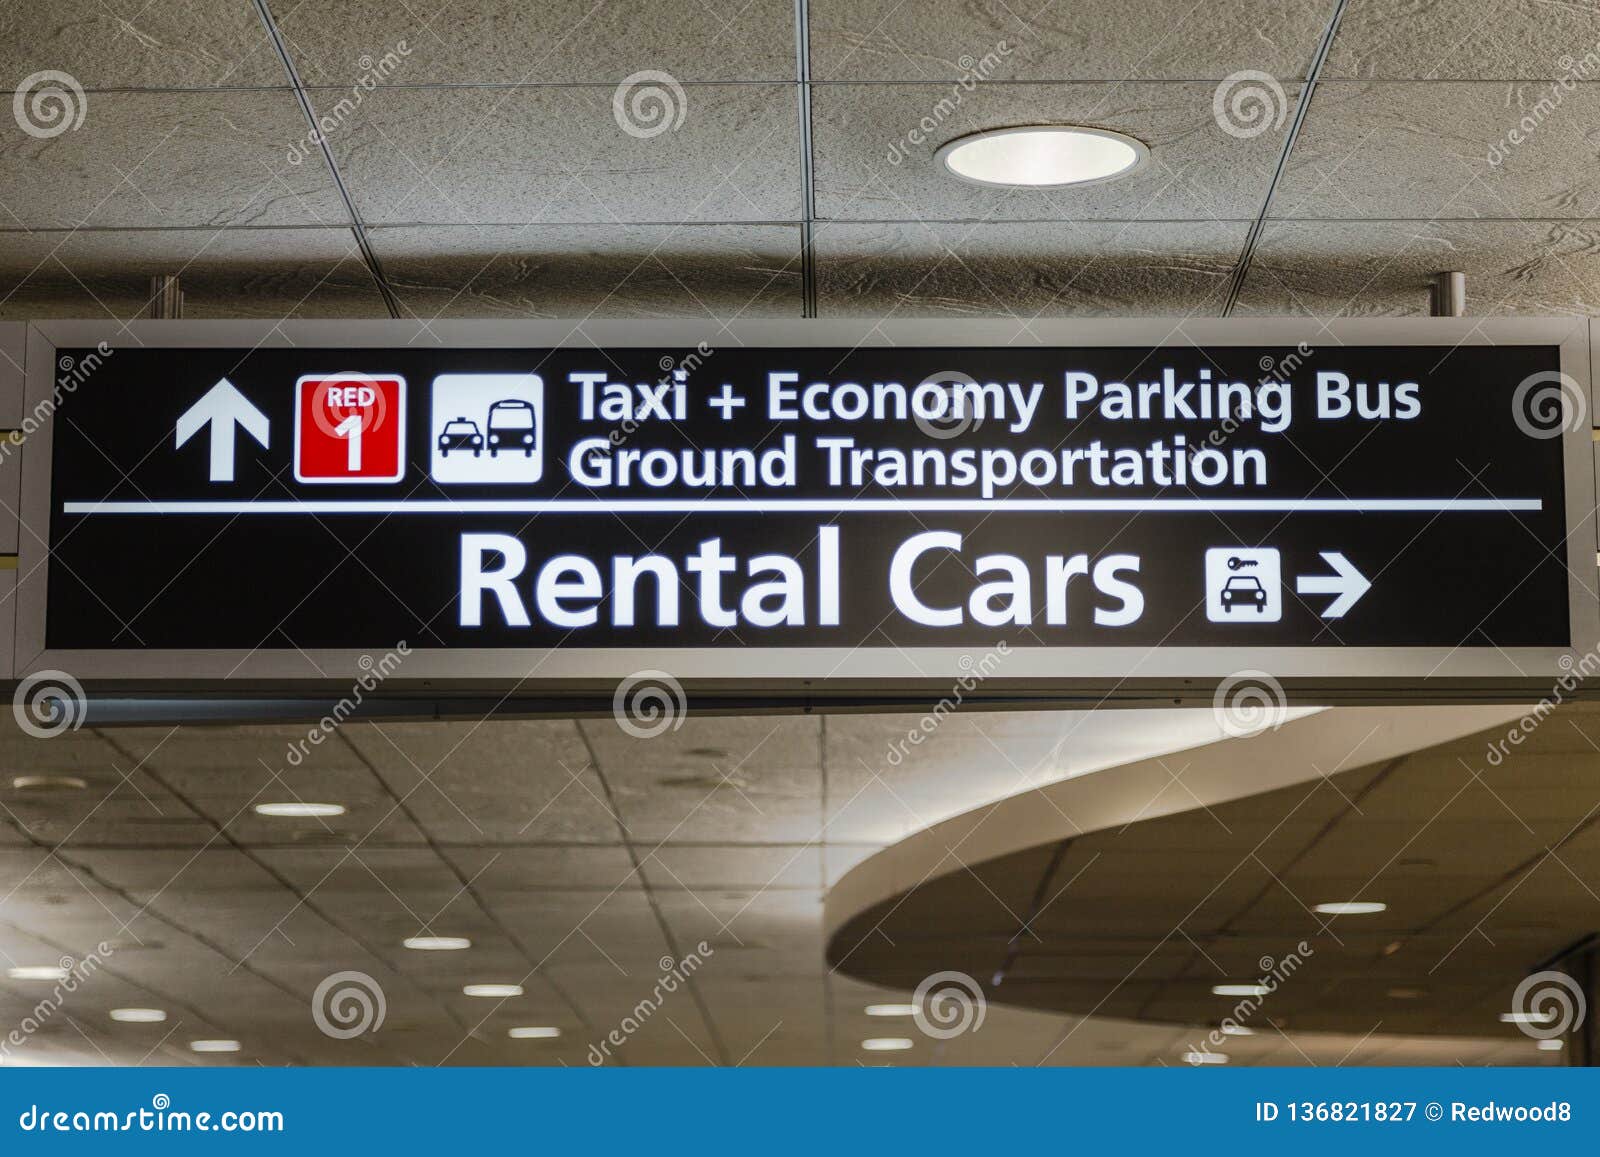 airport rental cars, parking and ground transportation sign